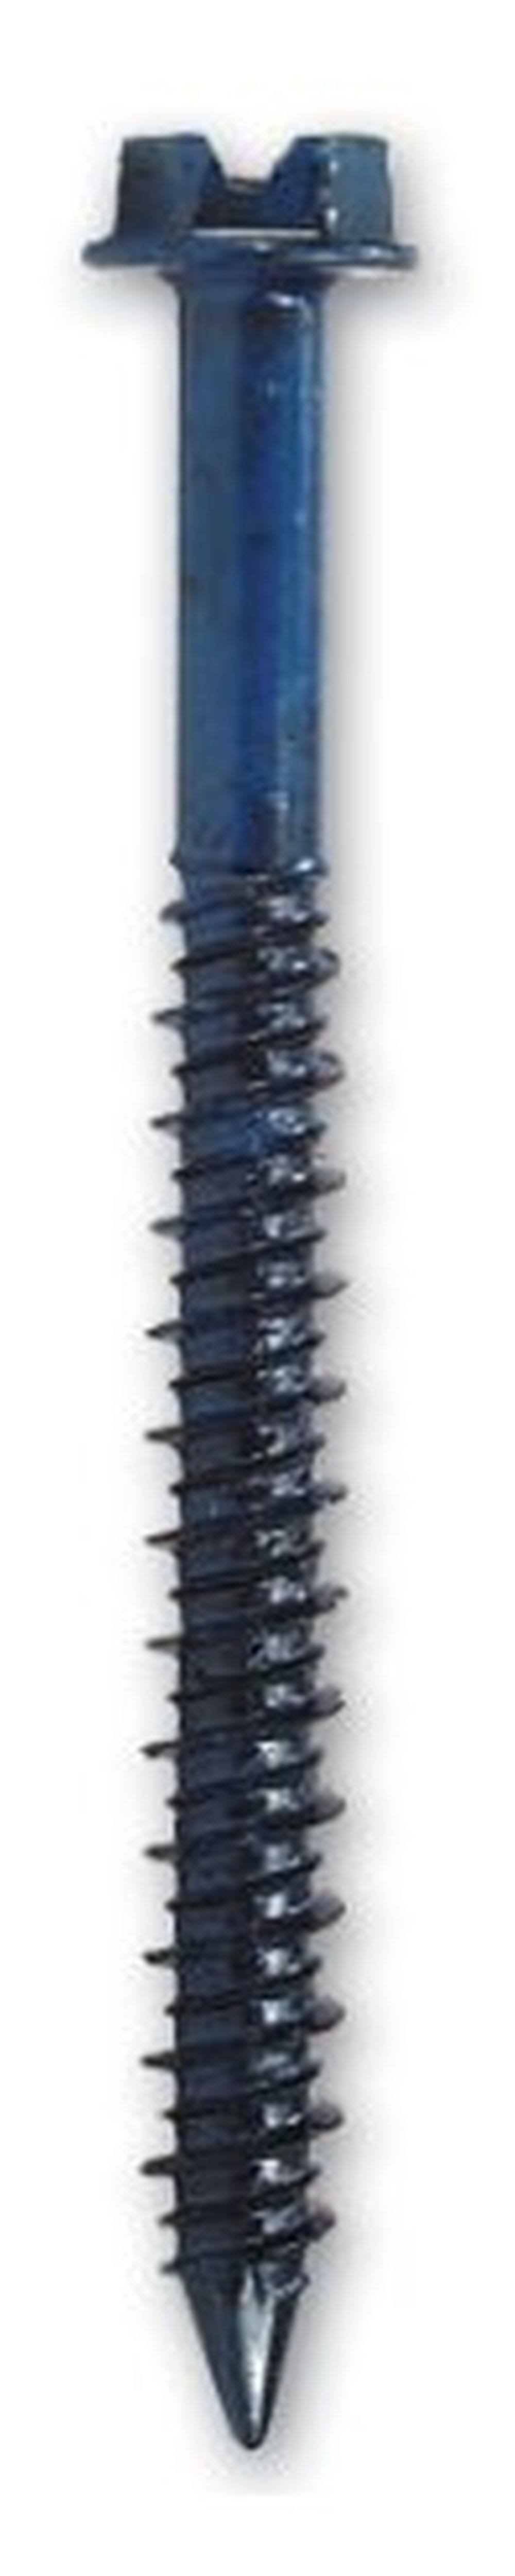 Simpson Strong Tie Concrete and Masonry Screw - Blue, 1/4"x3-1/4"